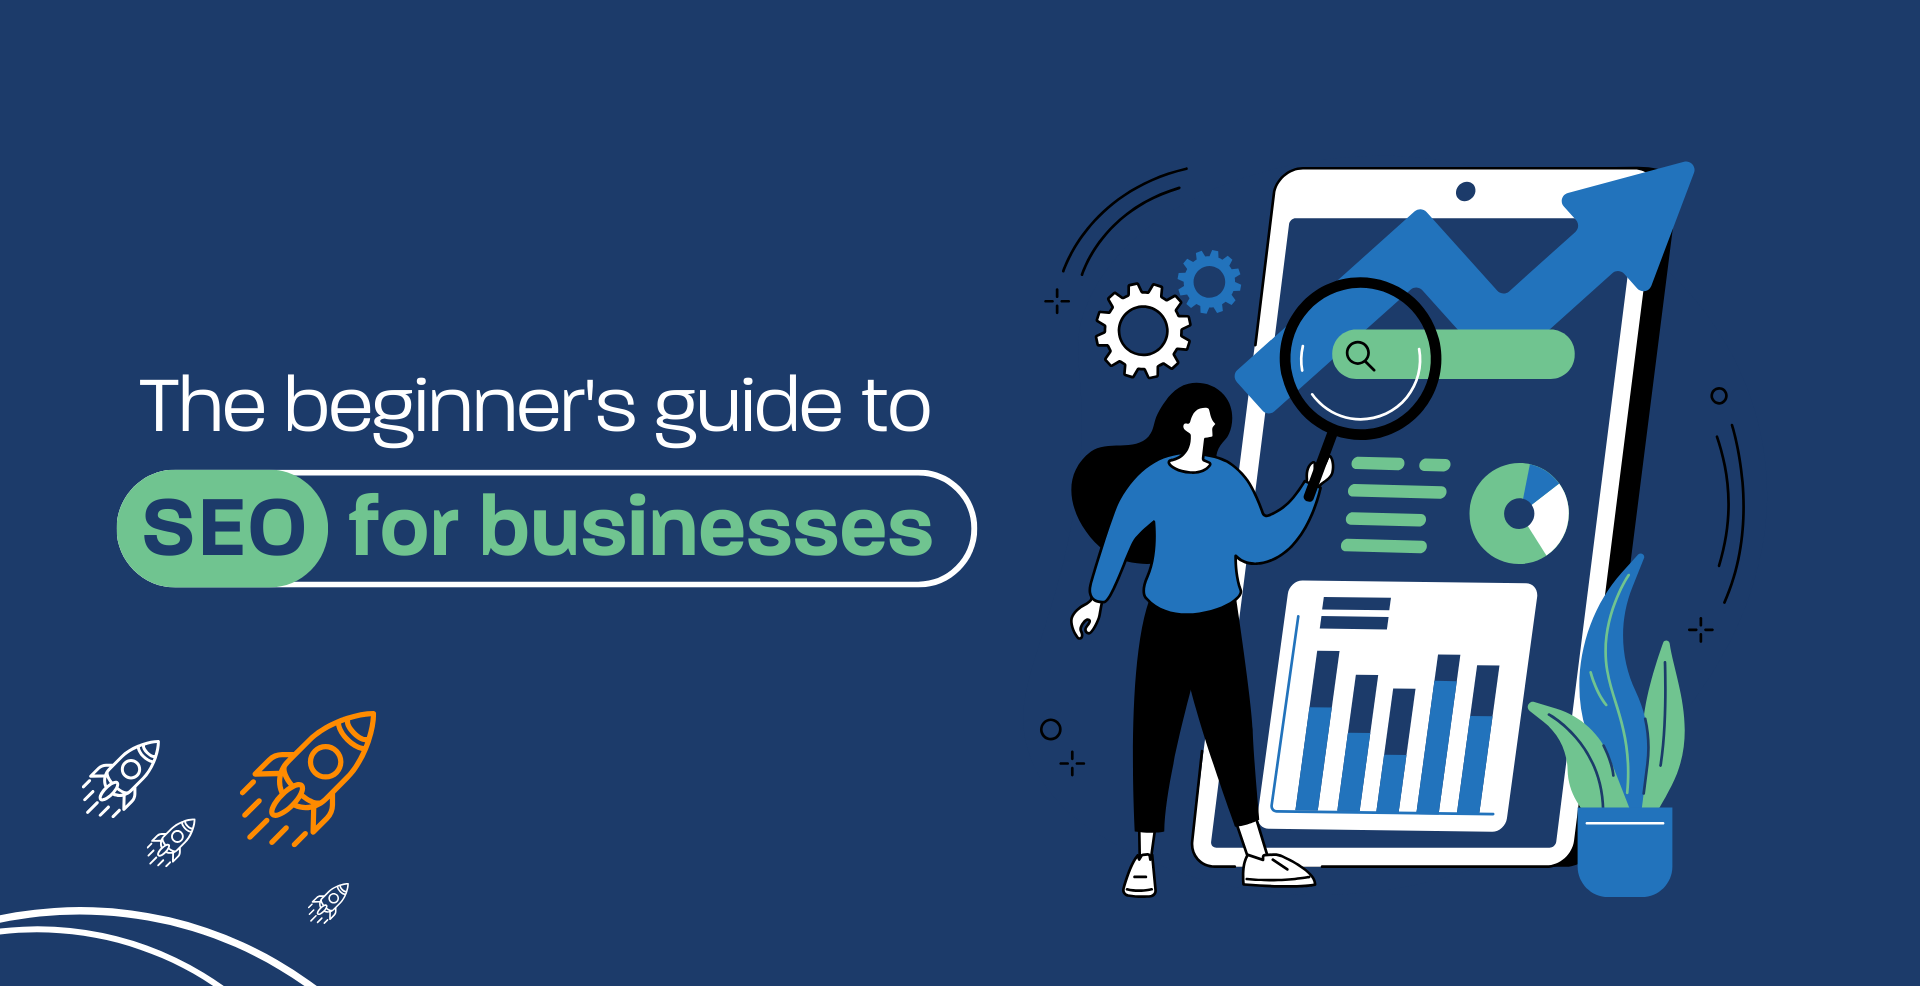 The beginner’s guide to SEO for businesses